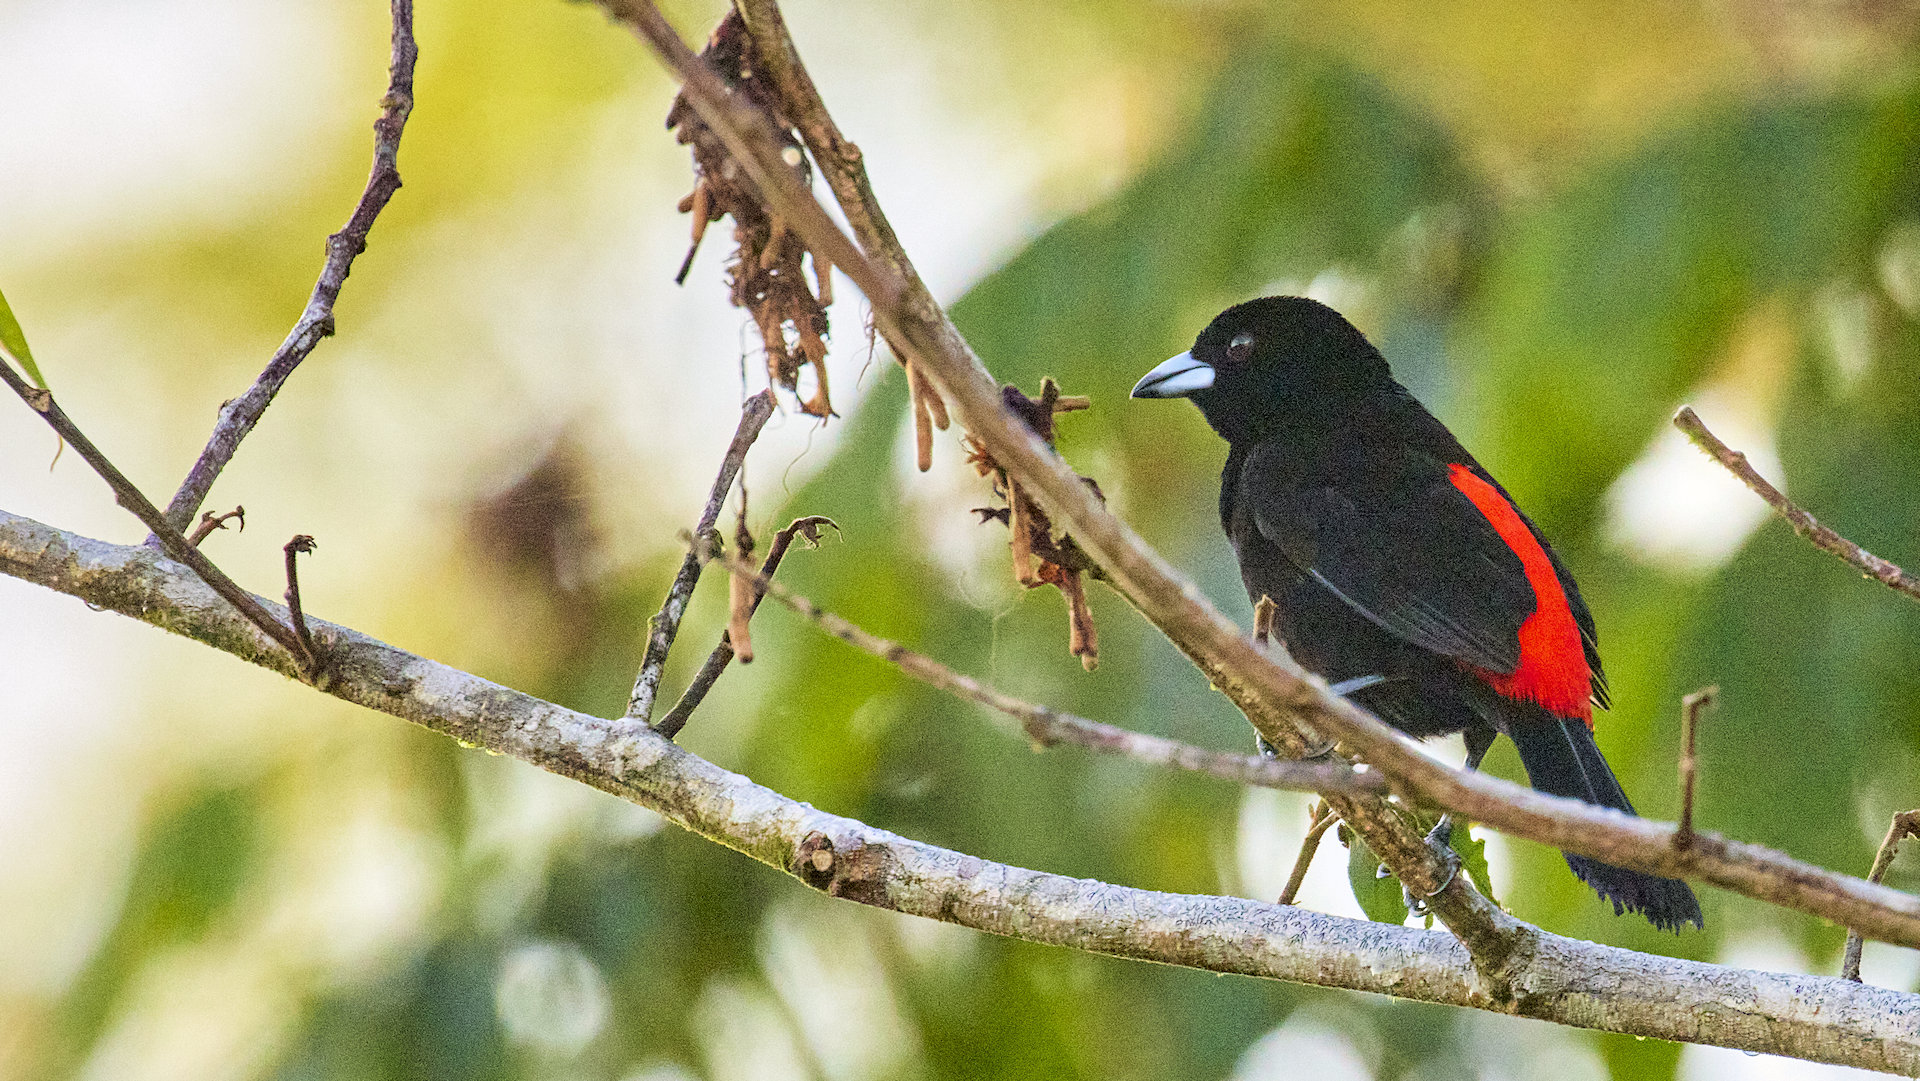 Scarlet rumped tanager scarlet rumped, fairly common and noticeable - image 17